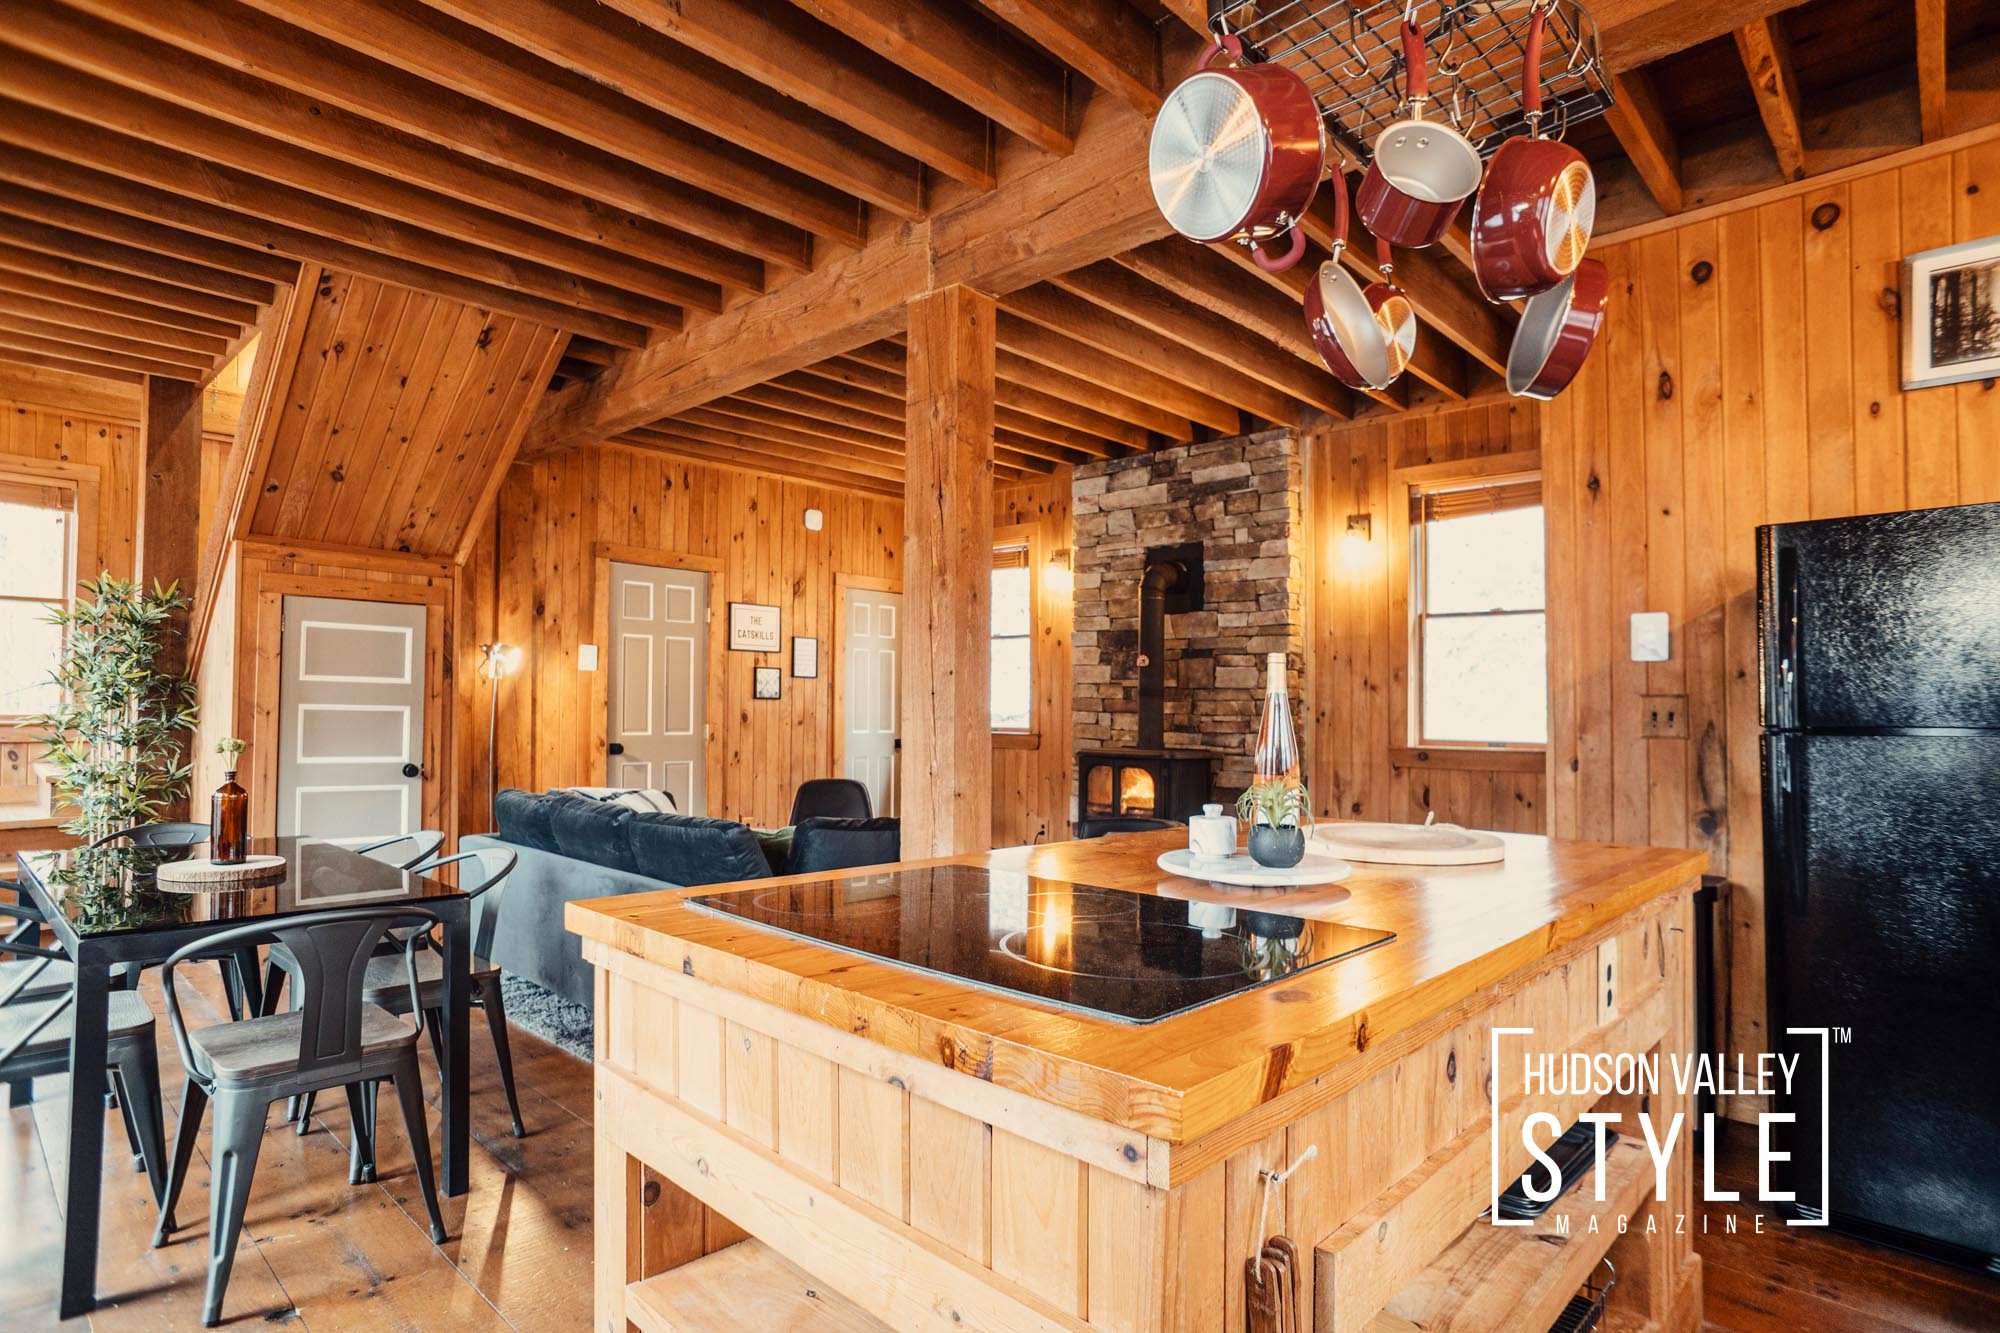 4 Tips for Finding the Best Fix-and-Flip Properties in the Hudson Valley and Upstate, NY – Presented by Dino Alexander, Principal Broker at the ALLUVION Real Estate – Best Real Estate Agents in Hudson Valley – Real Estate Photography by Alluvion Media